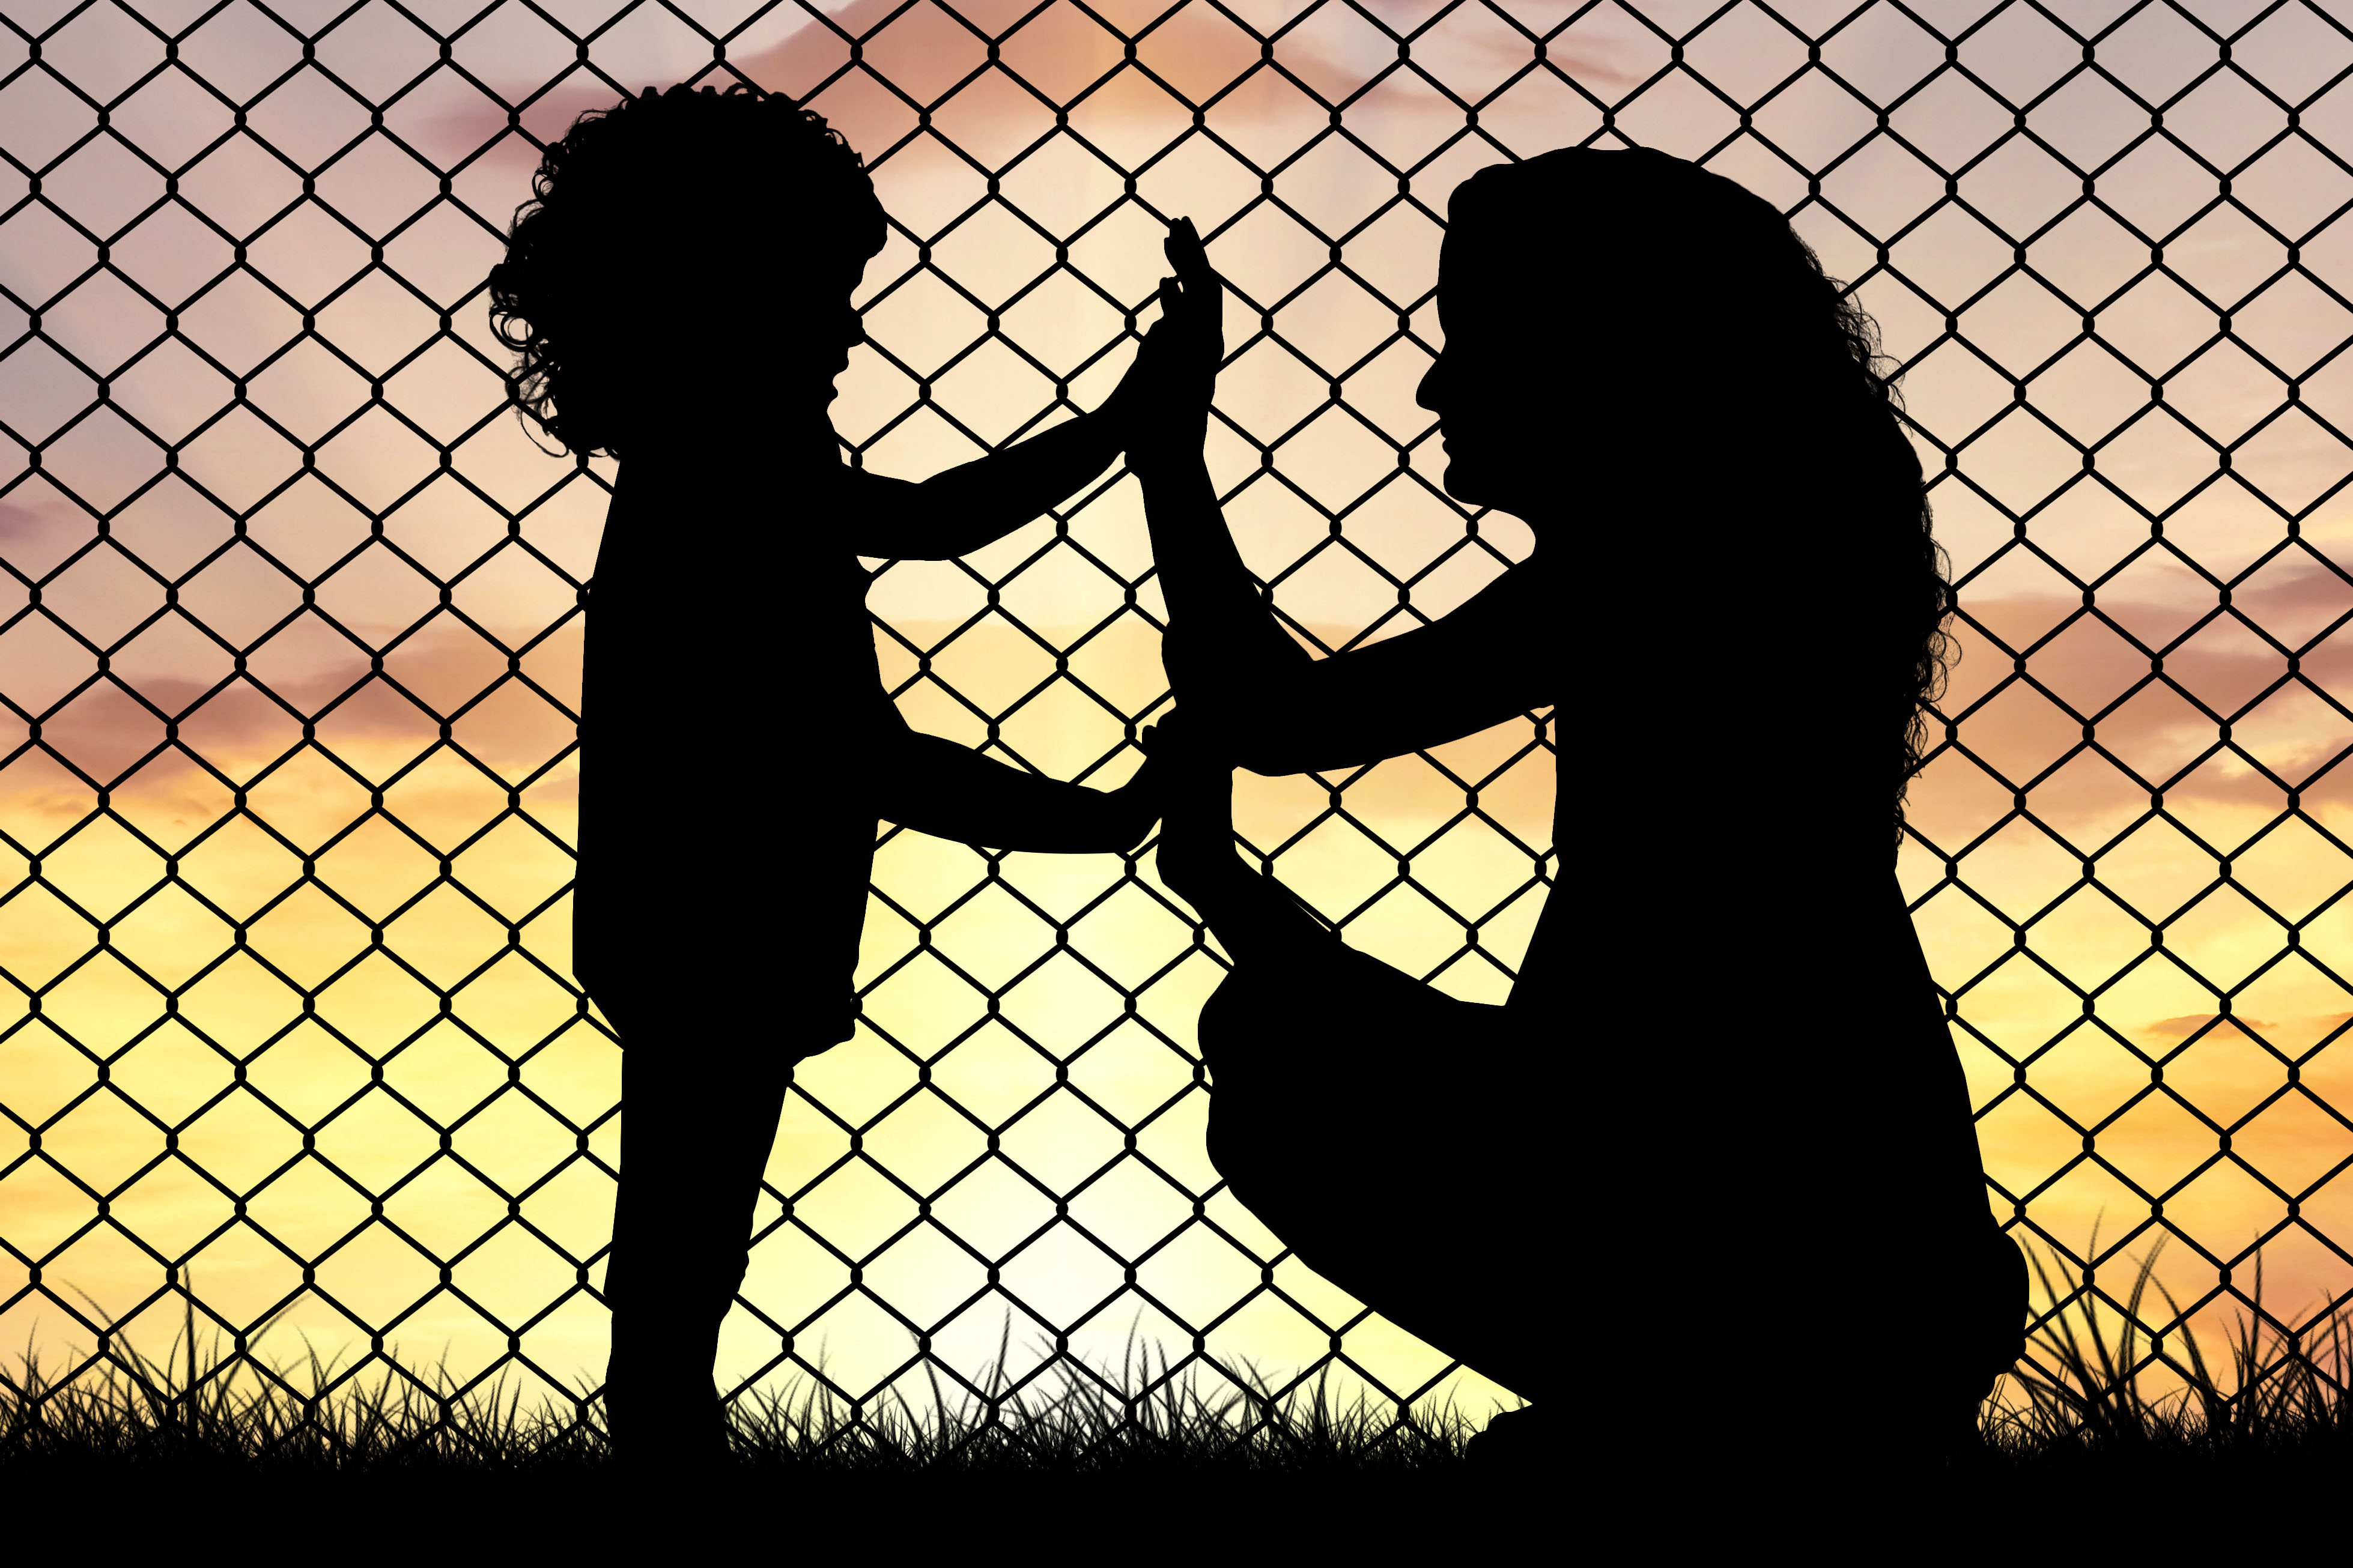 Image of mother and daughter silhouettes holding hands in front of a fence.